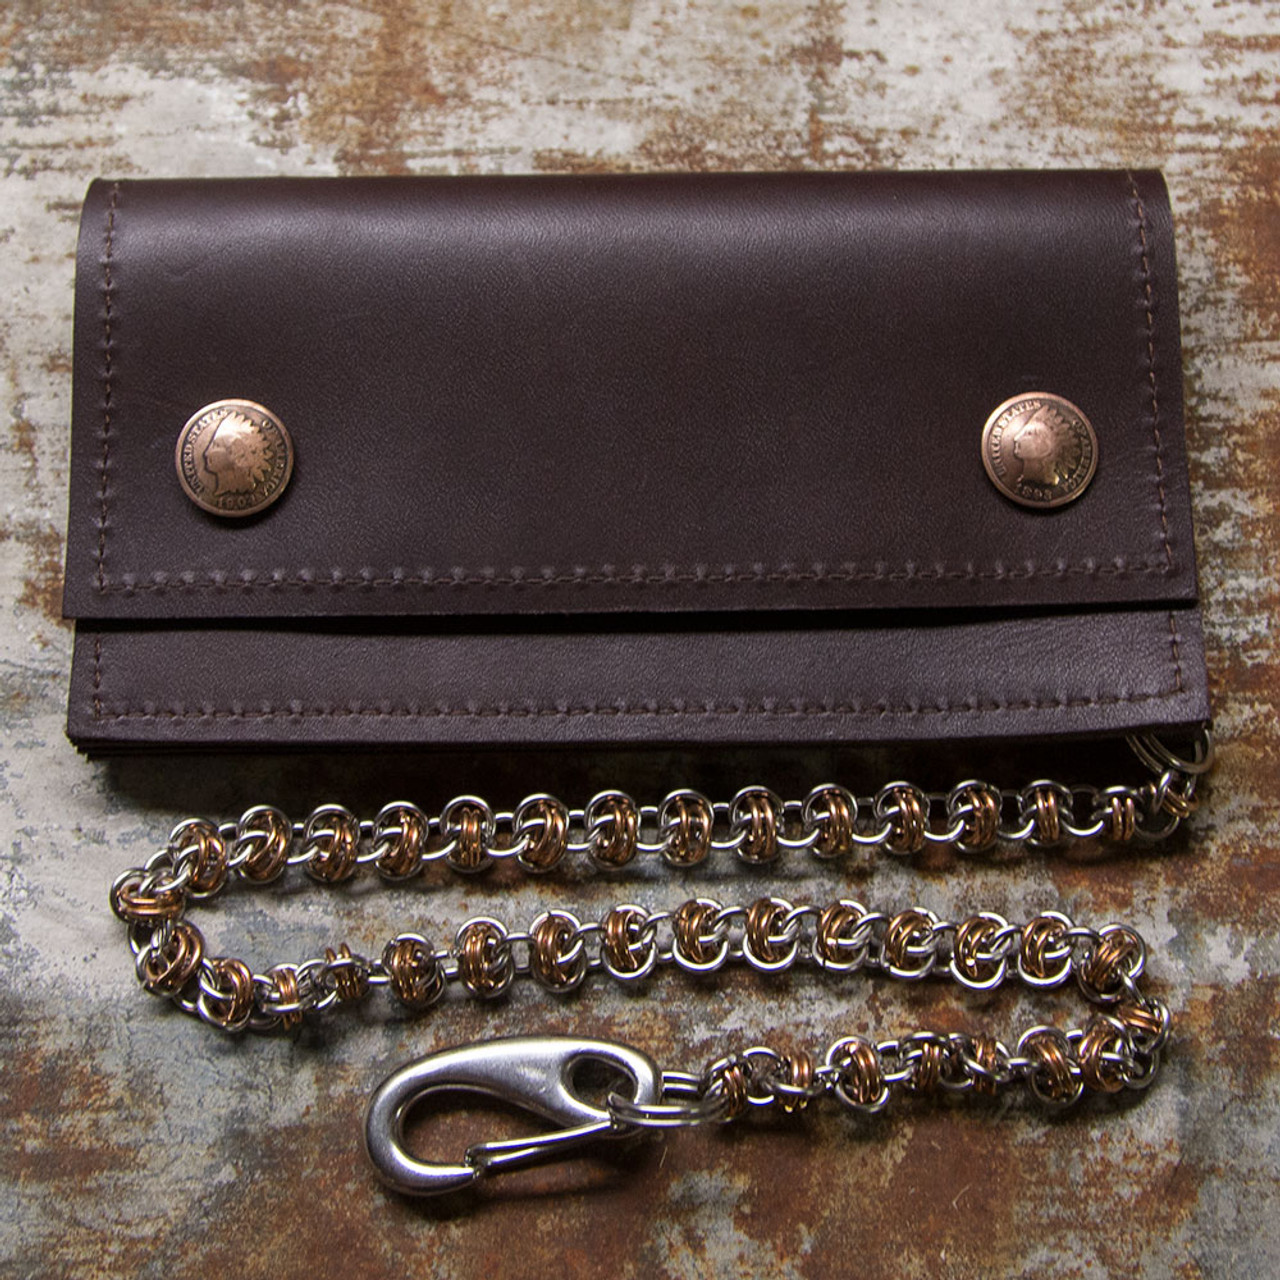 Hand and Hide Custom Leather Left-Handed Wallet Phone Case - Hand